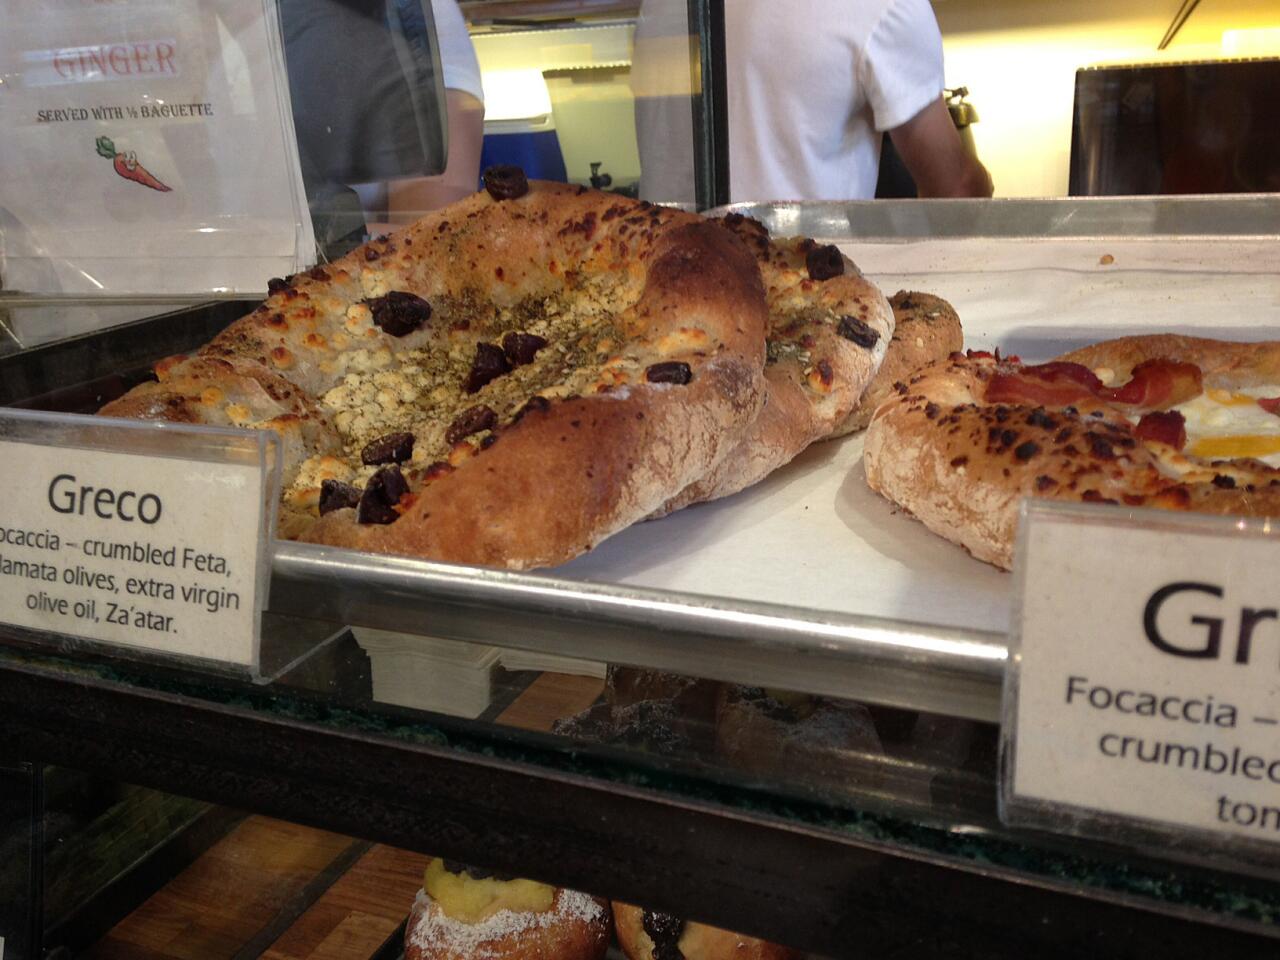 There are plenty of savory focaccia breads ($6.95-$8.95) that can be split for a light dinner for two, if served alongside some leftovers, salad greens or a cup of soup.